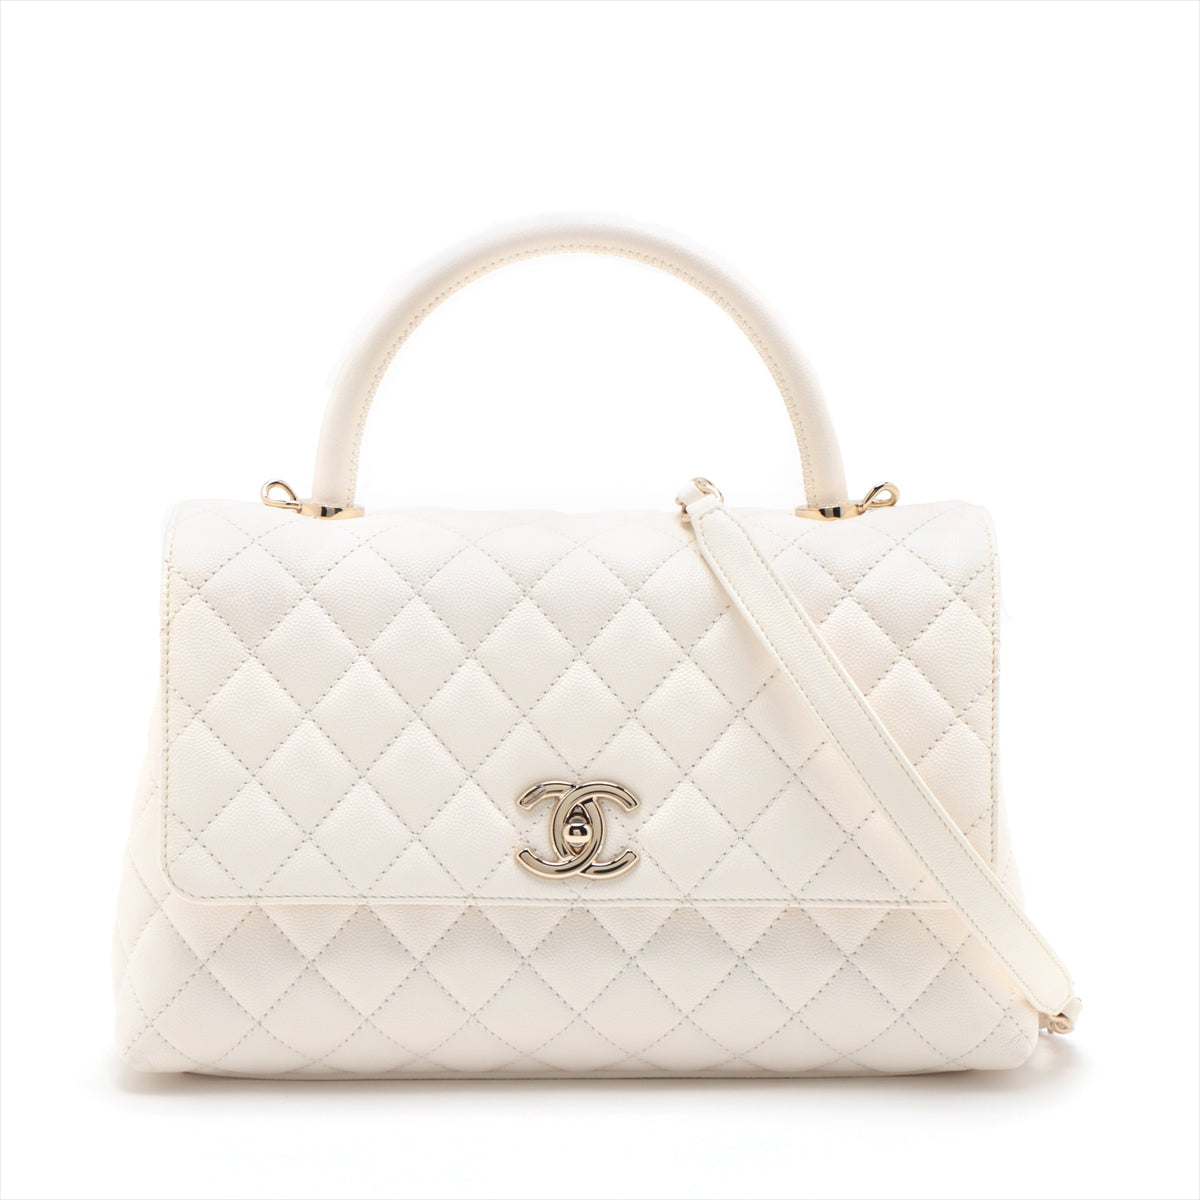 Chanel Coco handle 29 S Caviar Skin 2 Way Shoulder Bag White Gold Metal Fittings A92991